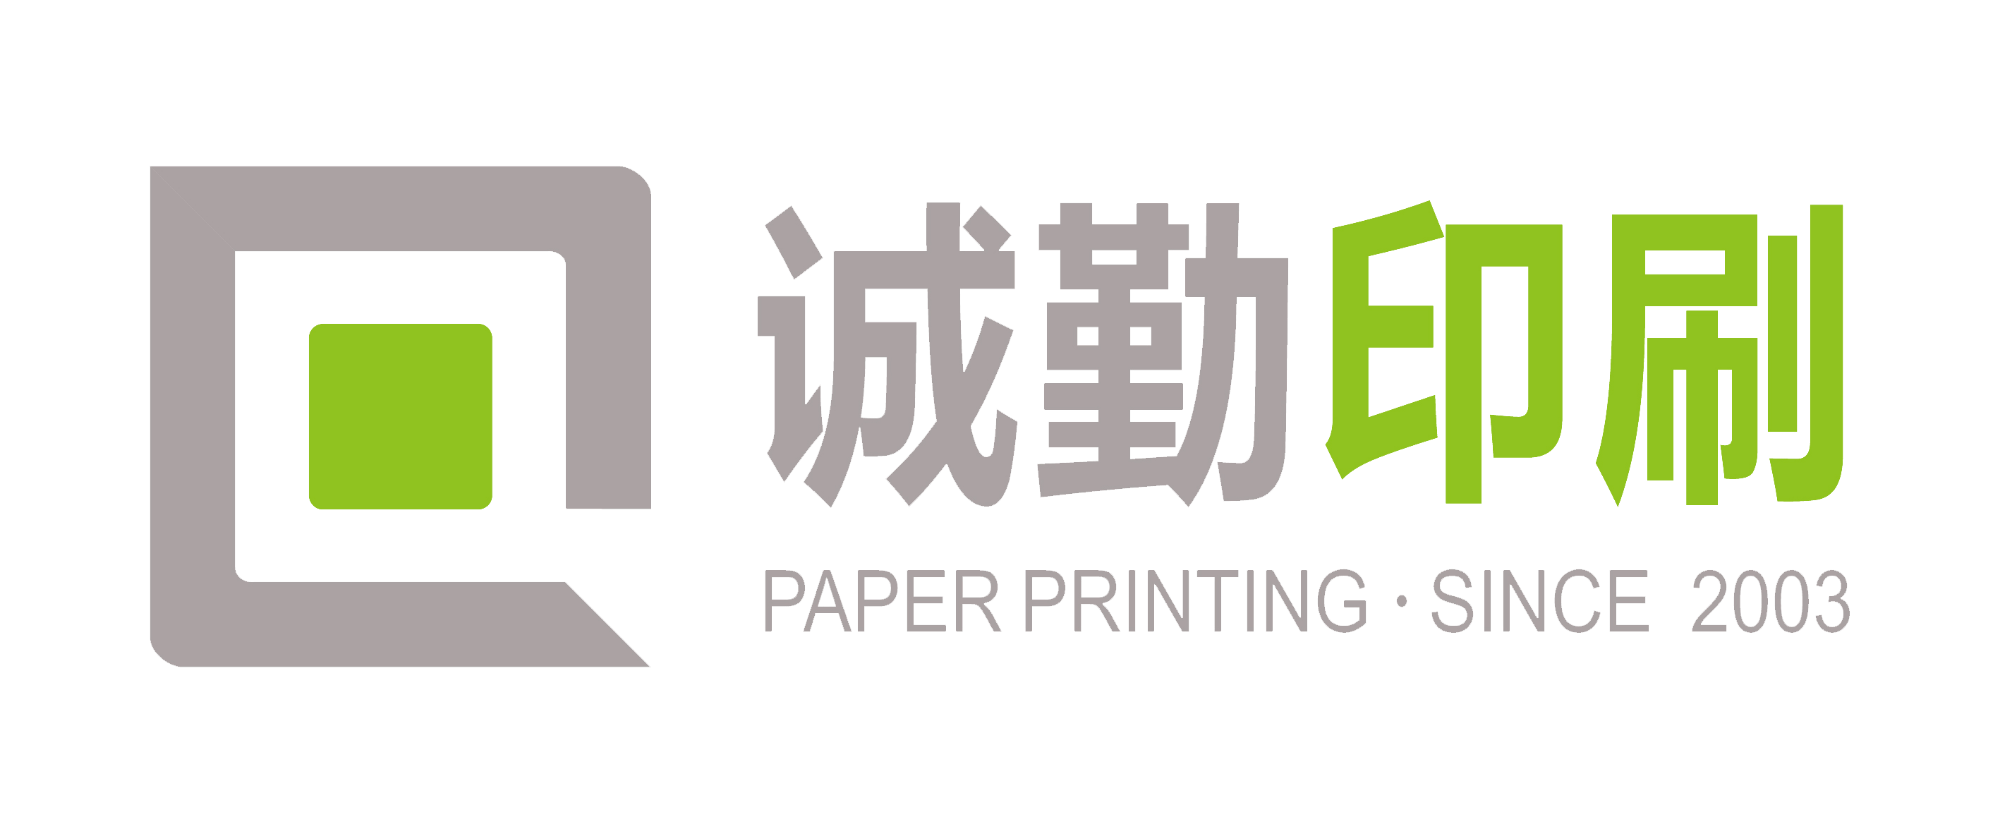 Leading Manufacturer of Paper Packagings